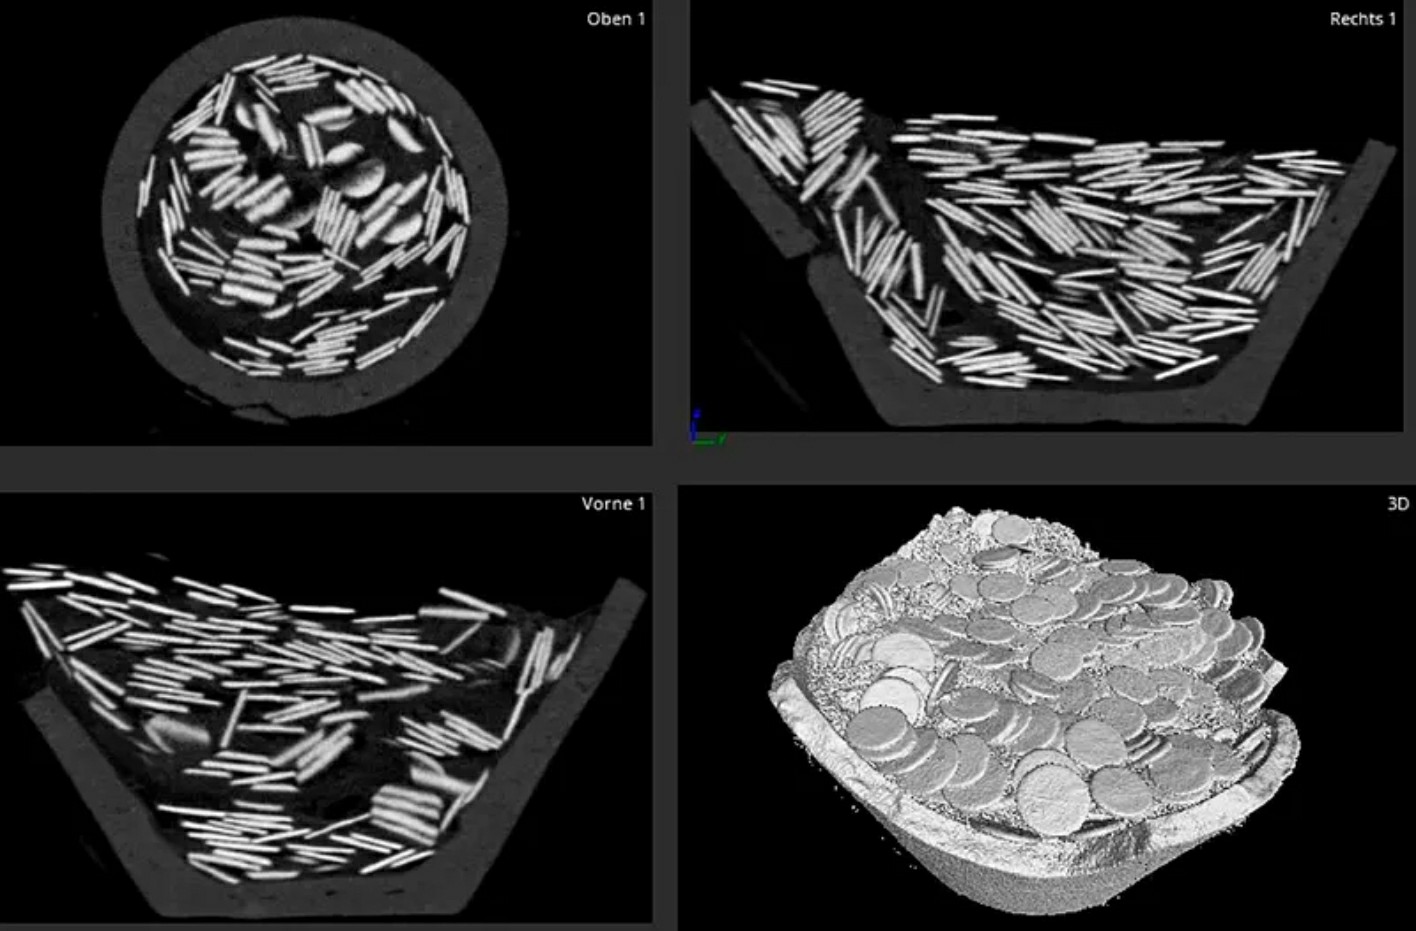 The Federal Materials Testing and Research Institute subjected the find to computer tomography and analyzed the composition of the coins. Tomography also revealed the cowhide strap that separated the coins in two.